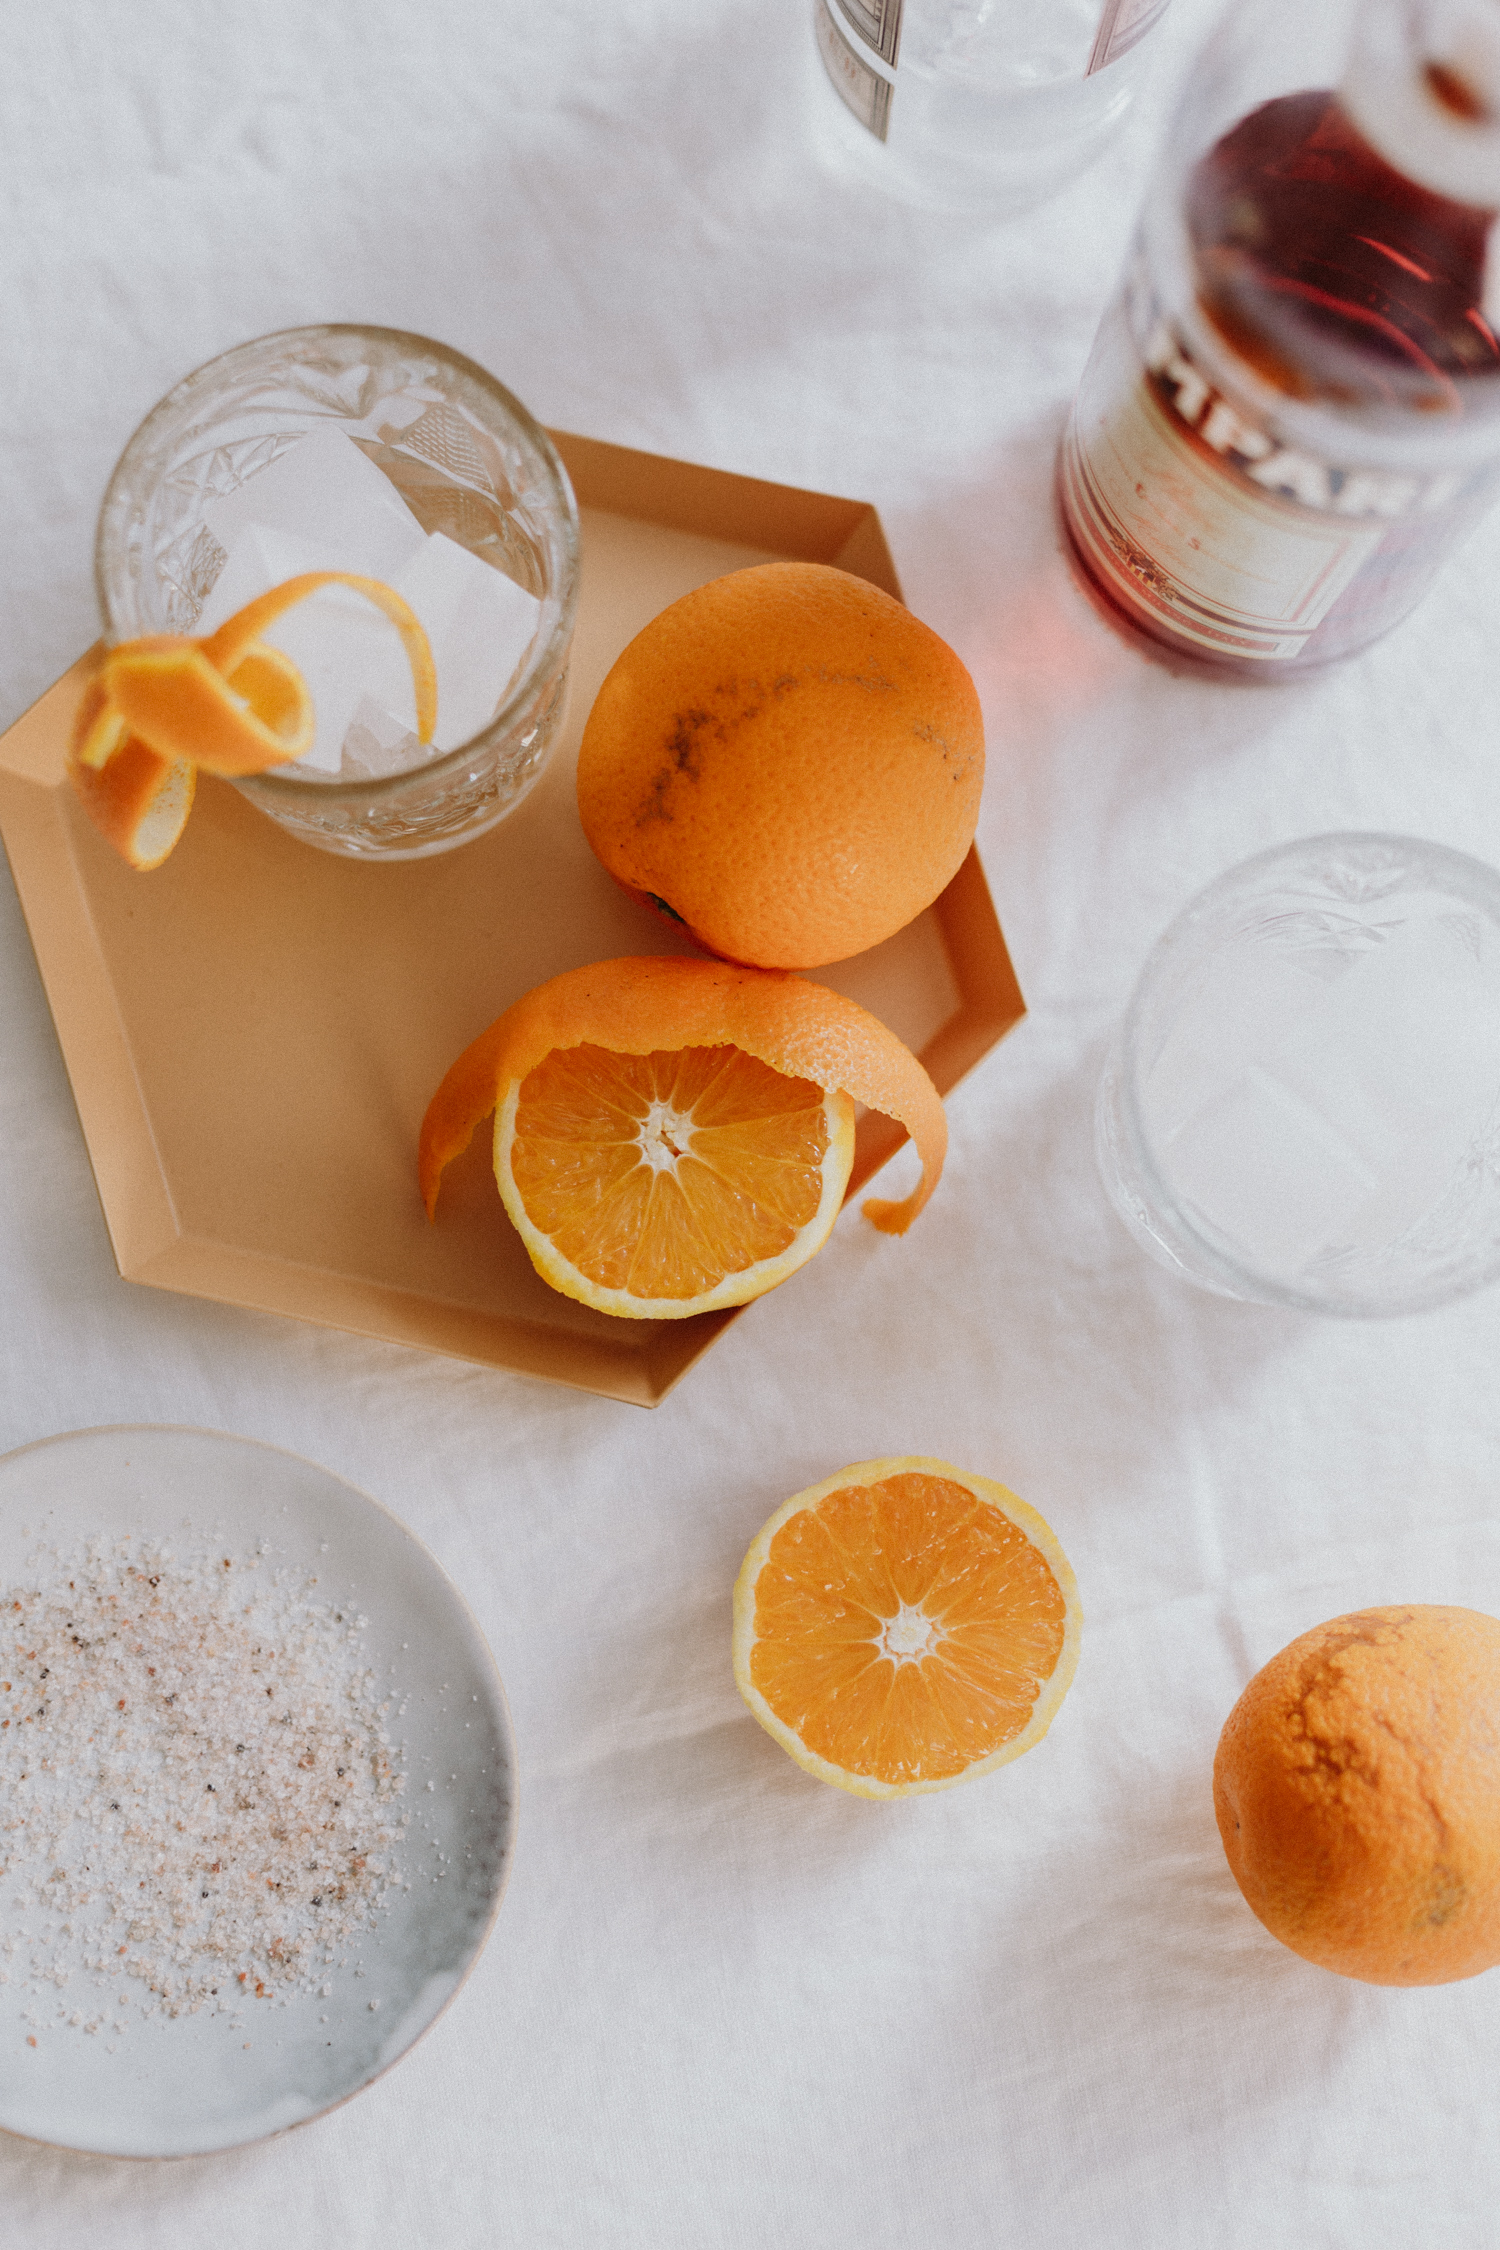 Salted Negroni Recipe: A cocktail classic with a twist - Love Daily Dose